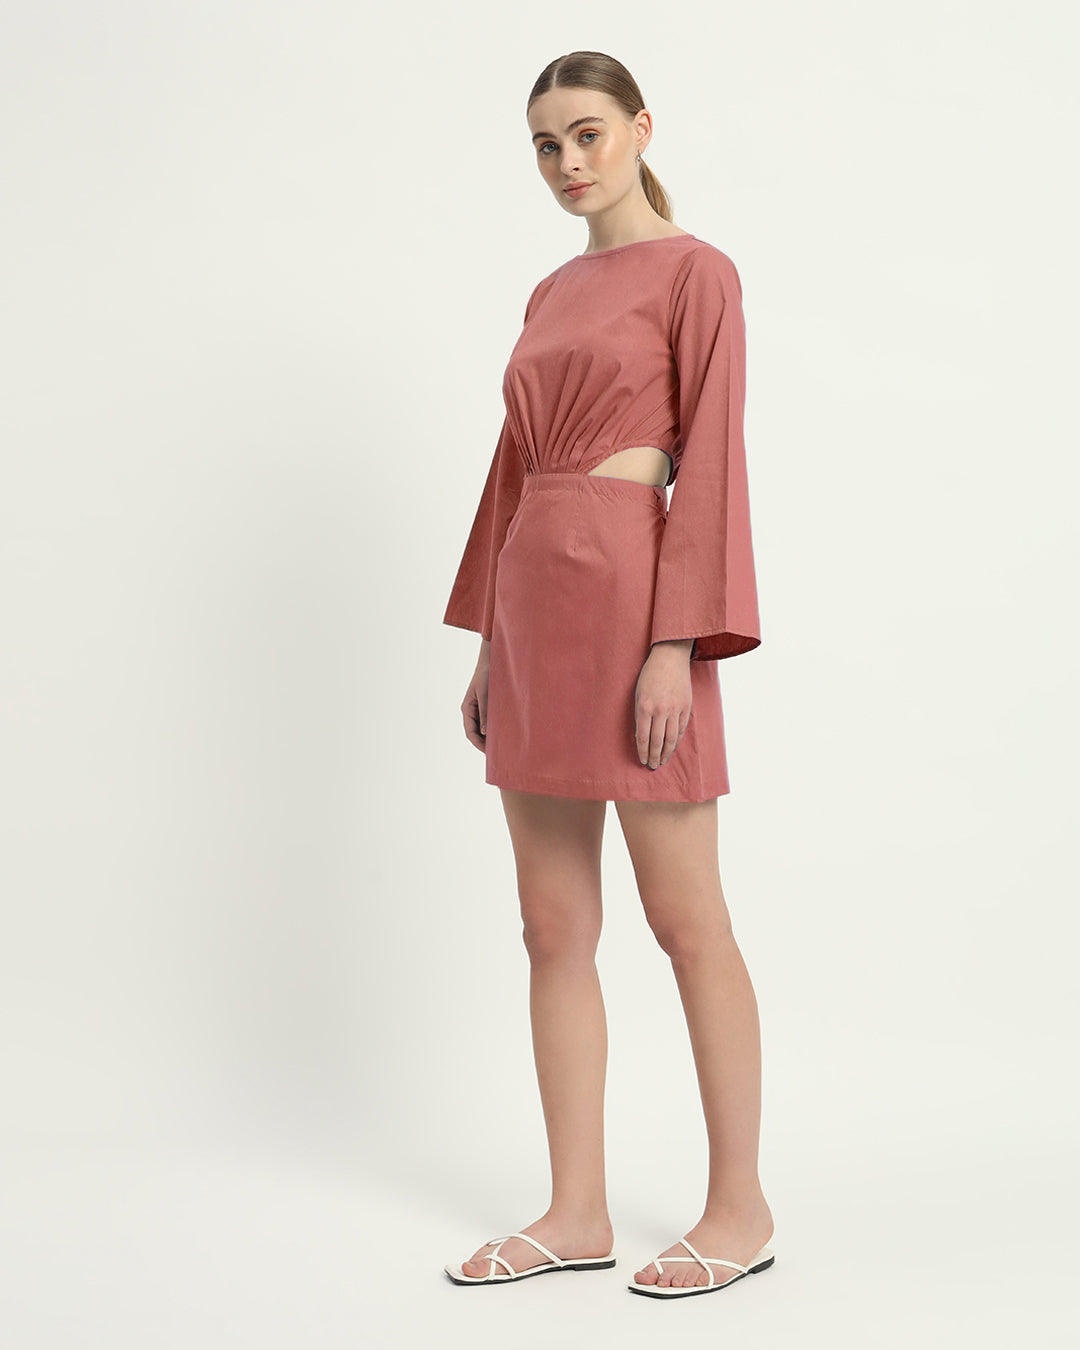 The Ivory Pink Eloy Cotton Dress